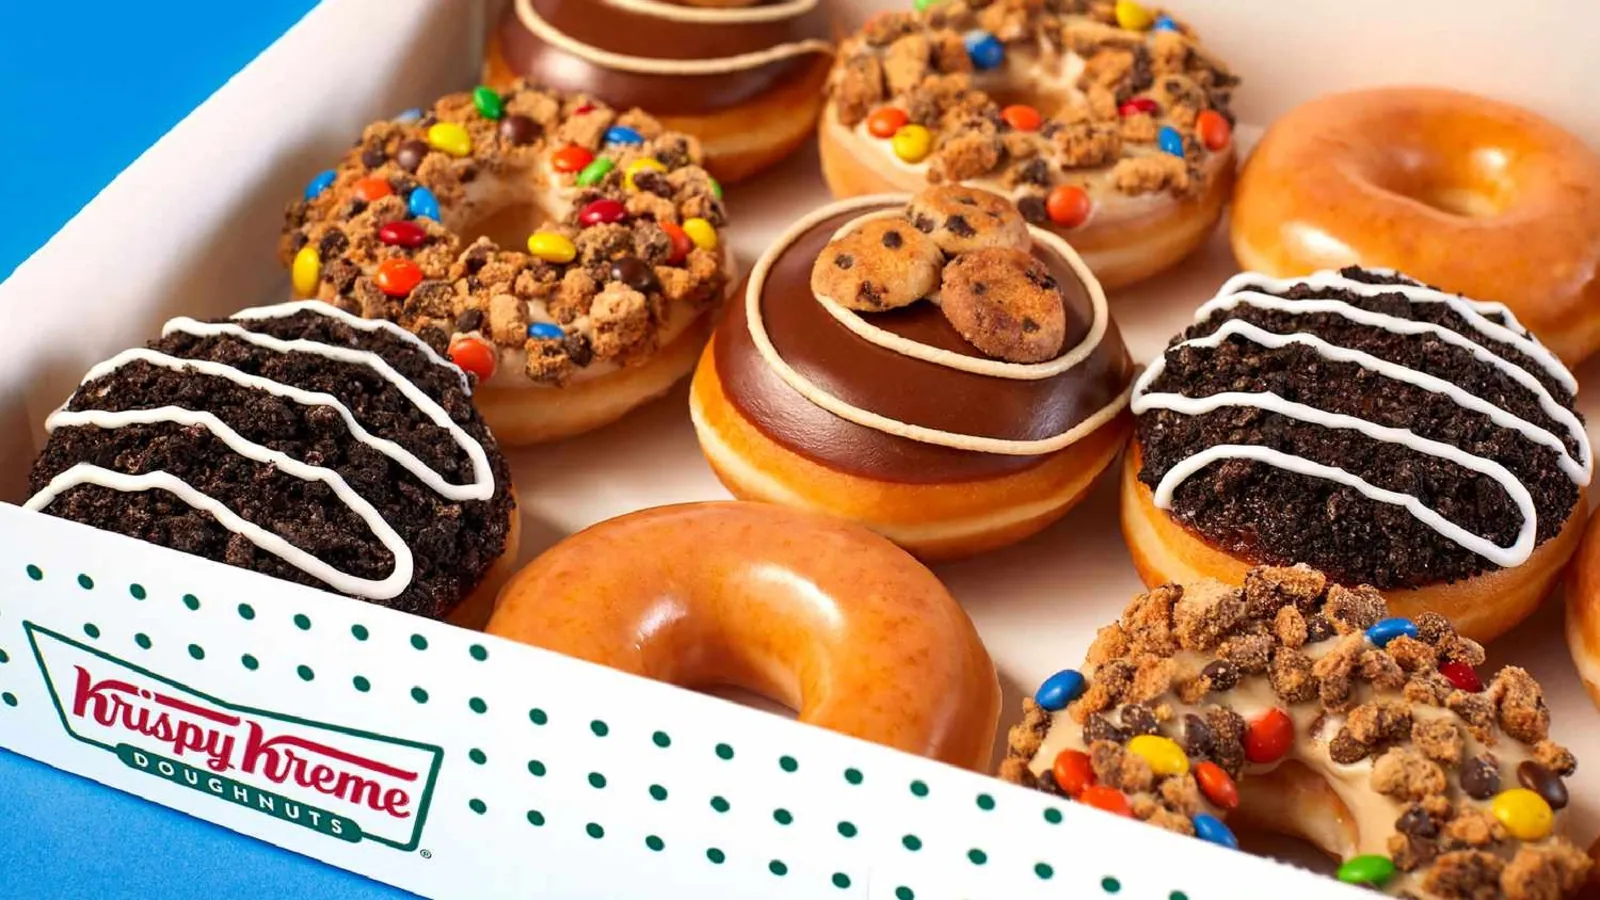 Sweet Expansion: Krispy Kreme Donuts to Hit All McDonald's in the US by 2026, Shares Skyrocket"